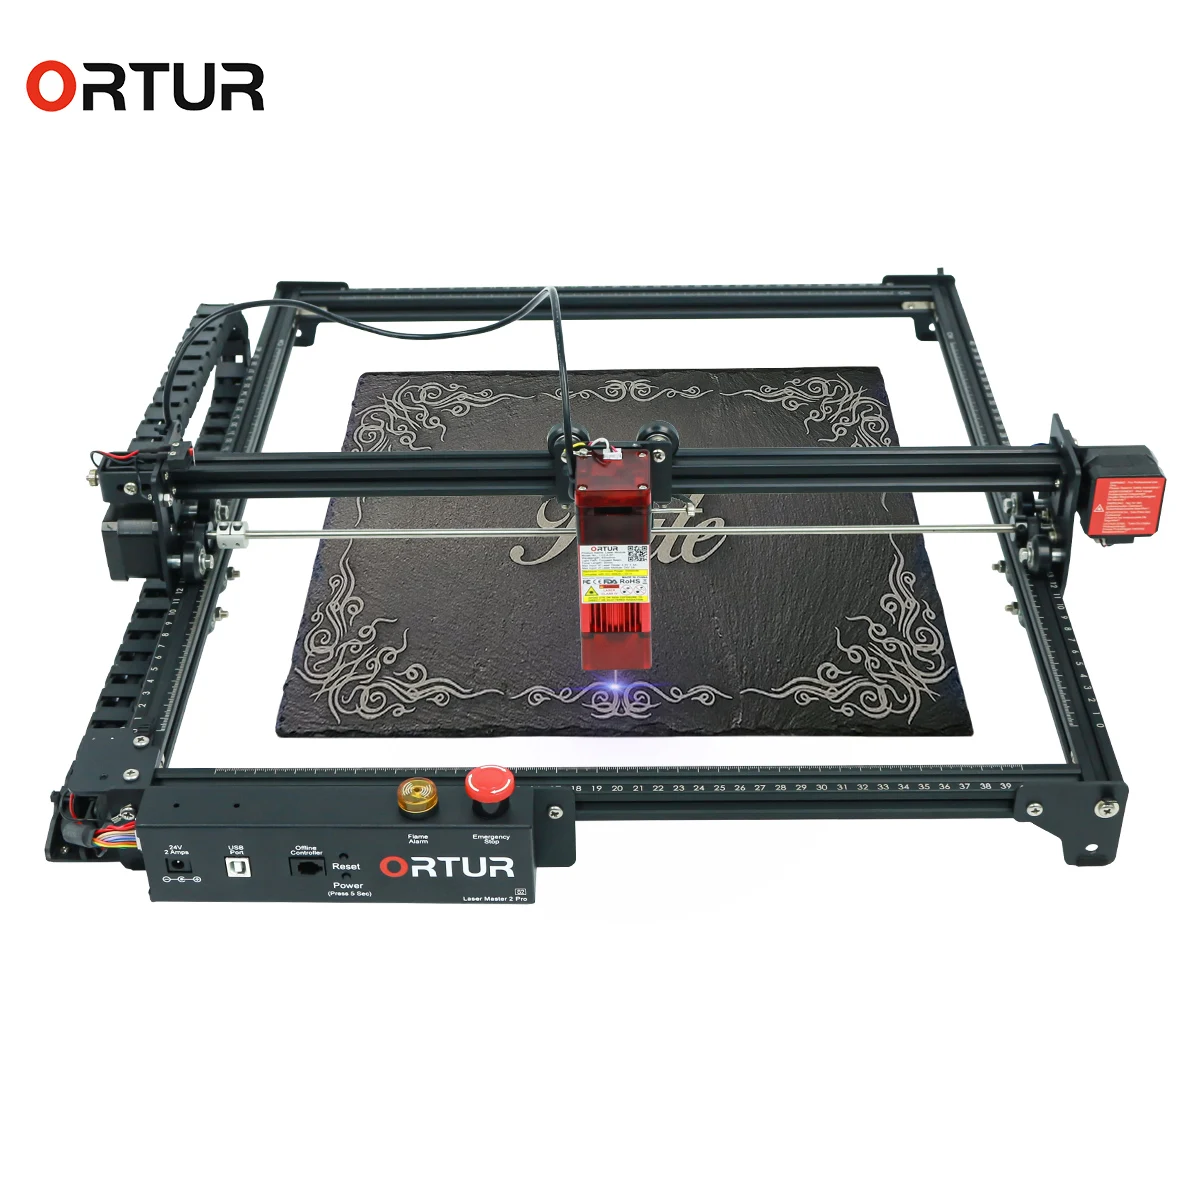 

2024 Desktop CNC Router Ortur Laser Master 2 High Security Multifunctionalstrong power Laser Engraving and Cutting Machine